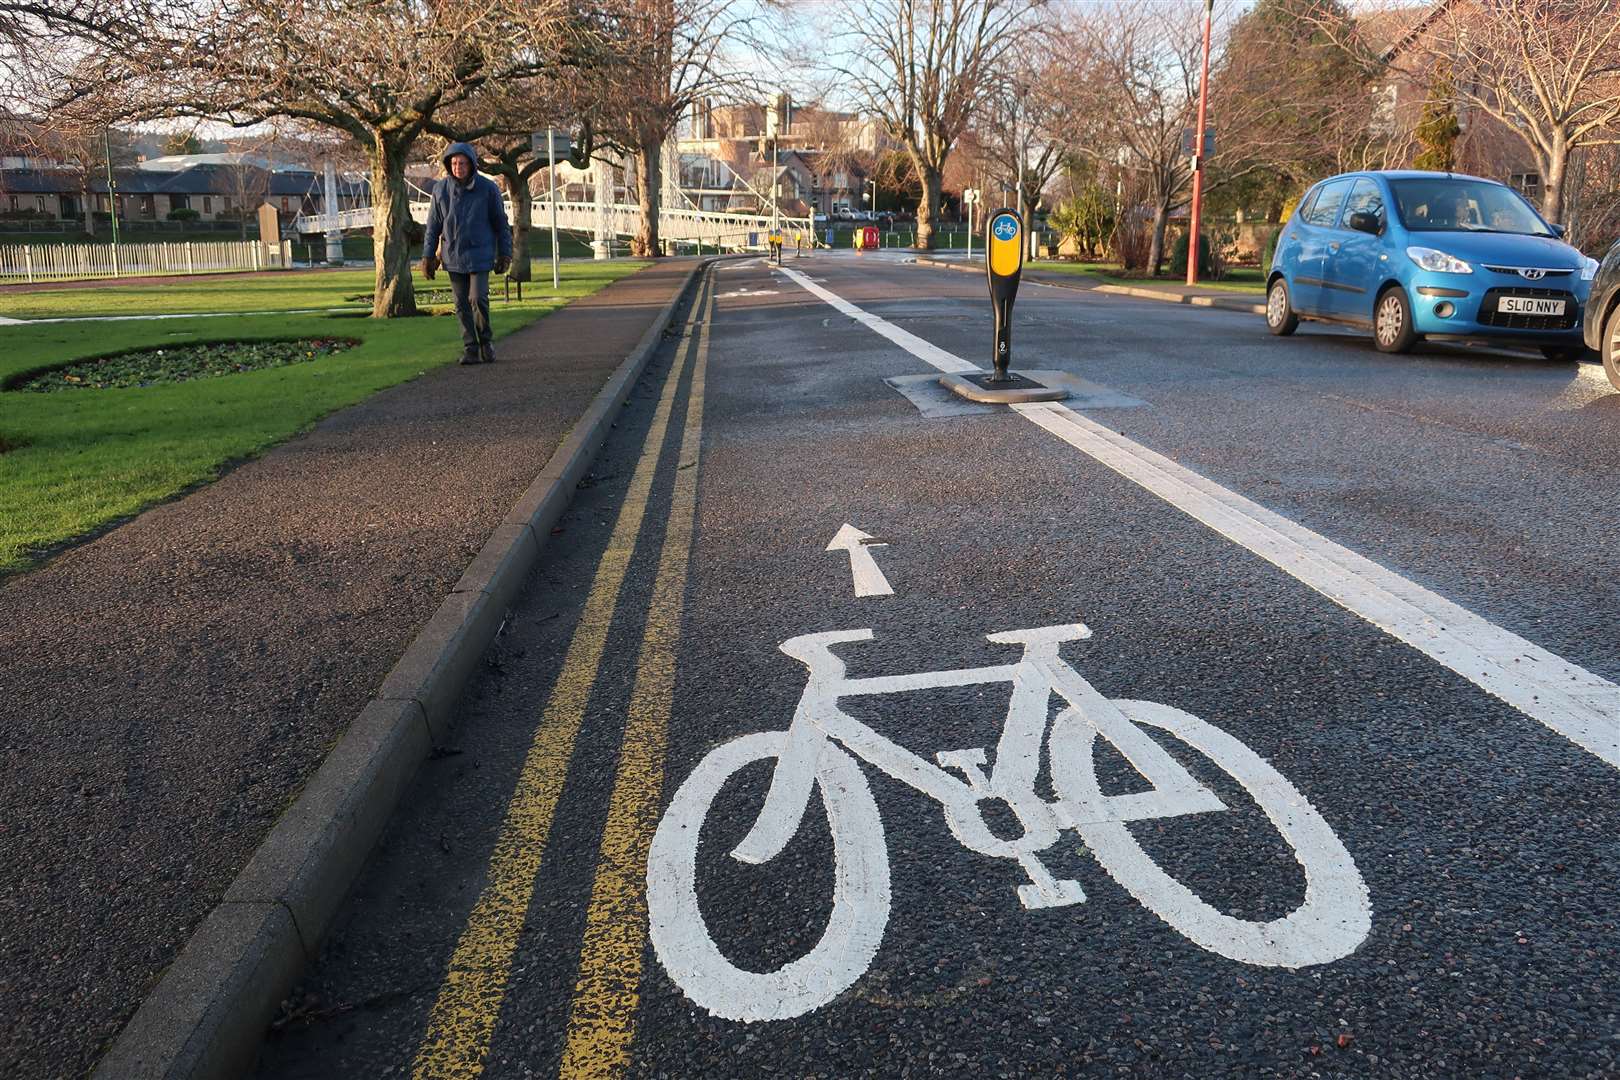 A survey suggests support for the idea of creating more space for cyclists.